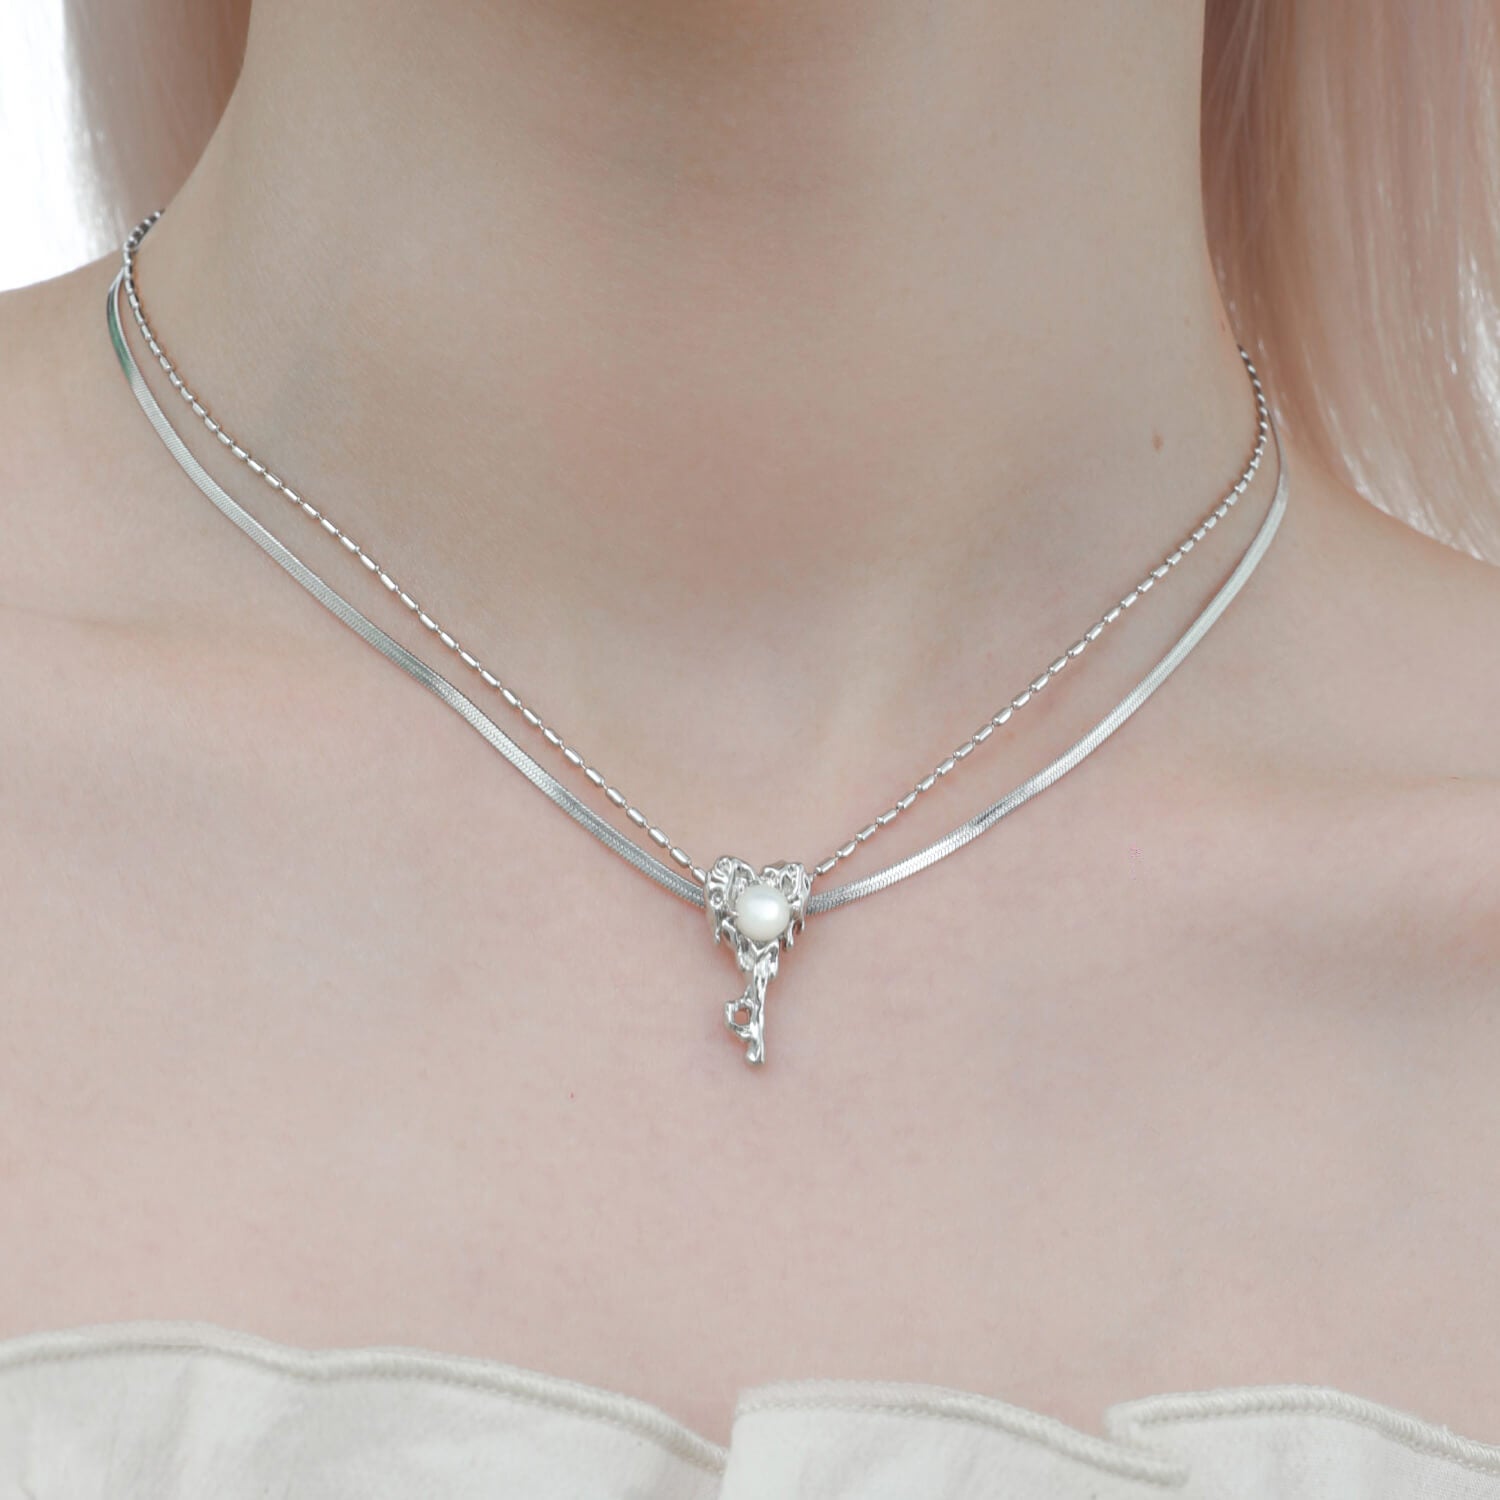 The focal point of this necklace is the heart-shaped key pendant, symbolizing the key to your heart's desires and adding a touch of romance to your style.